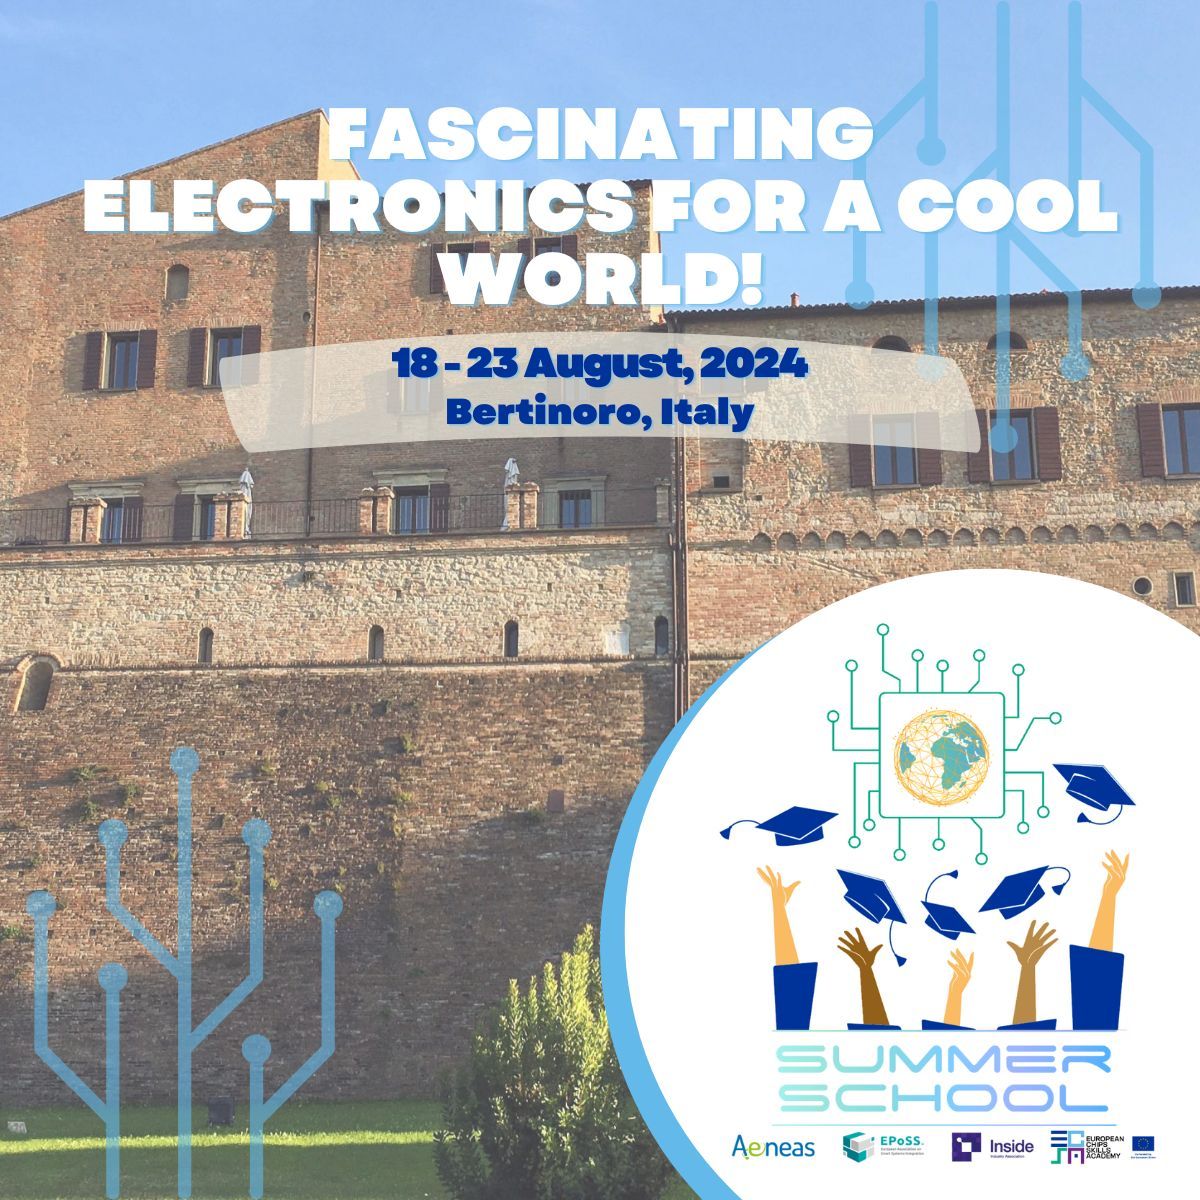 Hurry! The deadline for applications to the #ECSSummerSchool is only 20 days away. The second edition of the summer school will enable students to network with peers and learn from experts about the fabulous world of microelectronics. Apply here: lnkd.in/dyjT5JaT